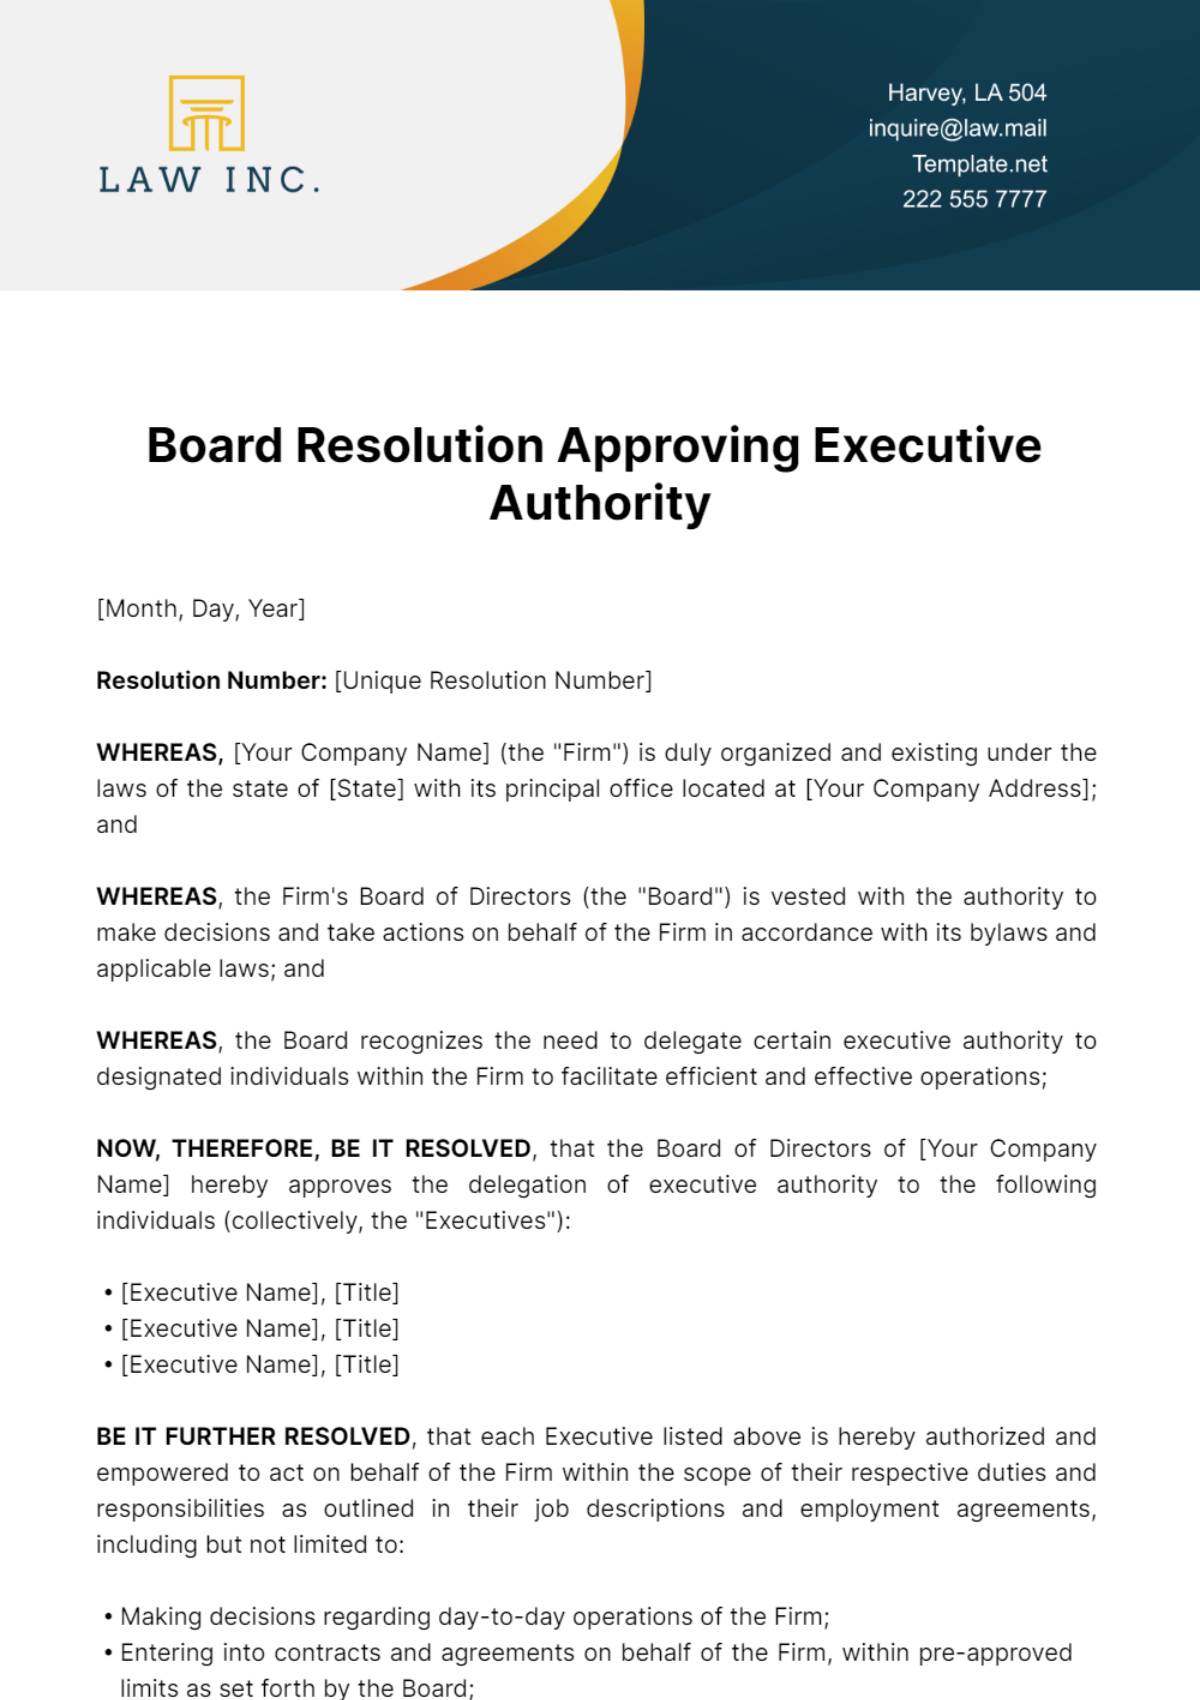 Law Firm Board Resolution Approving Executive Authority Template